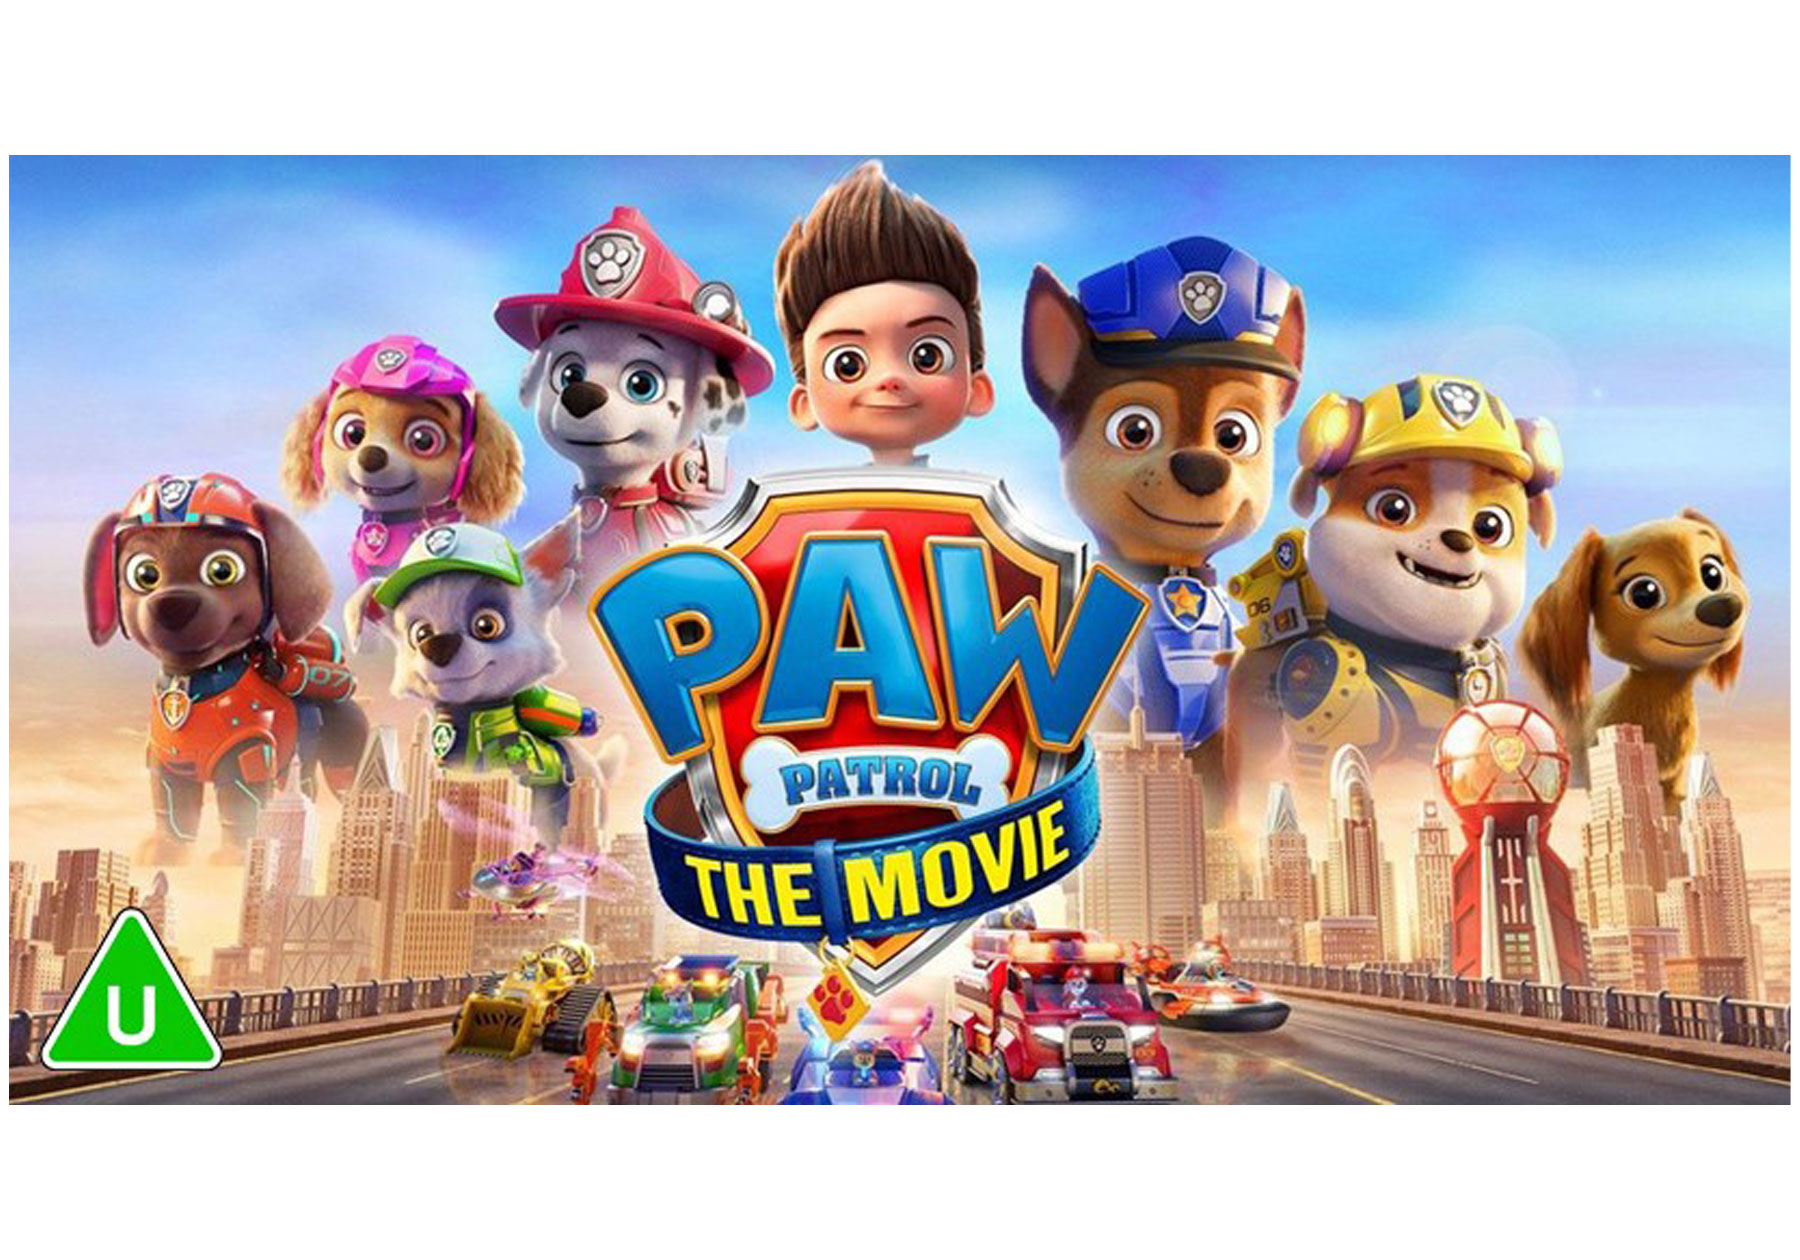 Win 4 tickets to see ‘The PAW Patrol Movie’